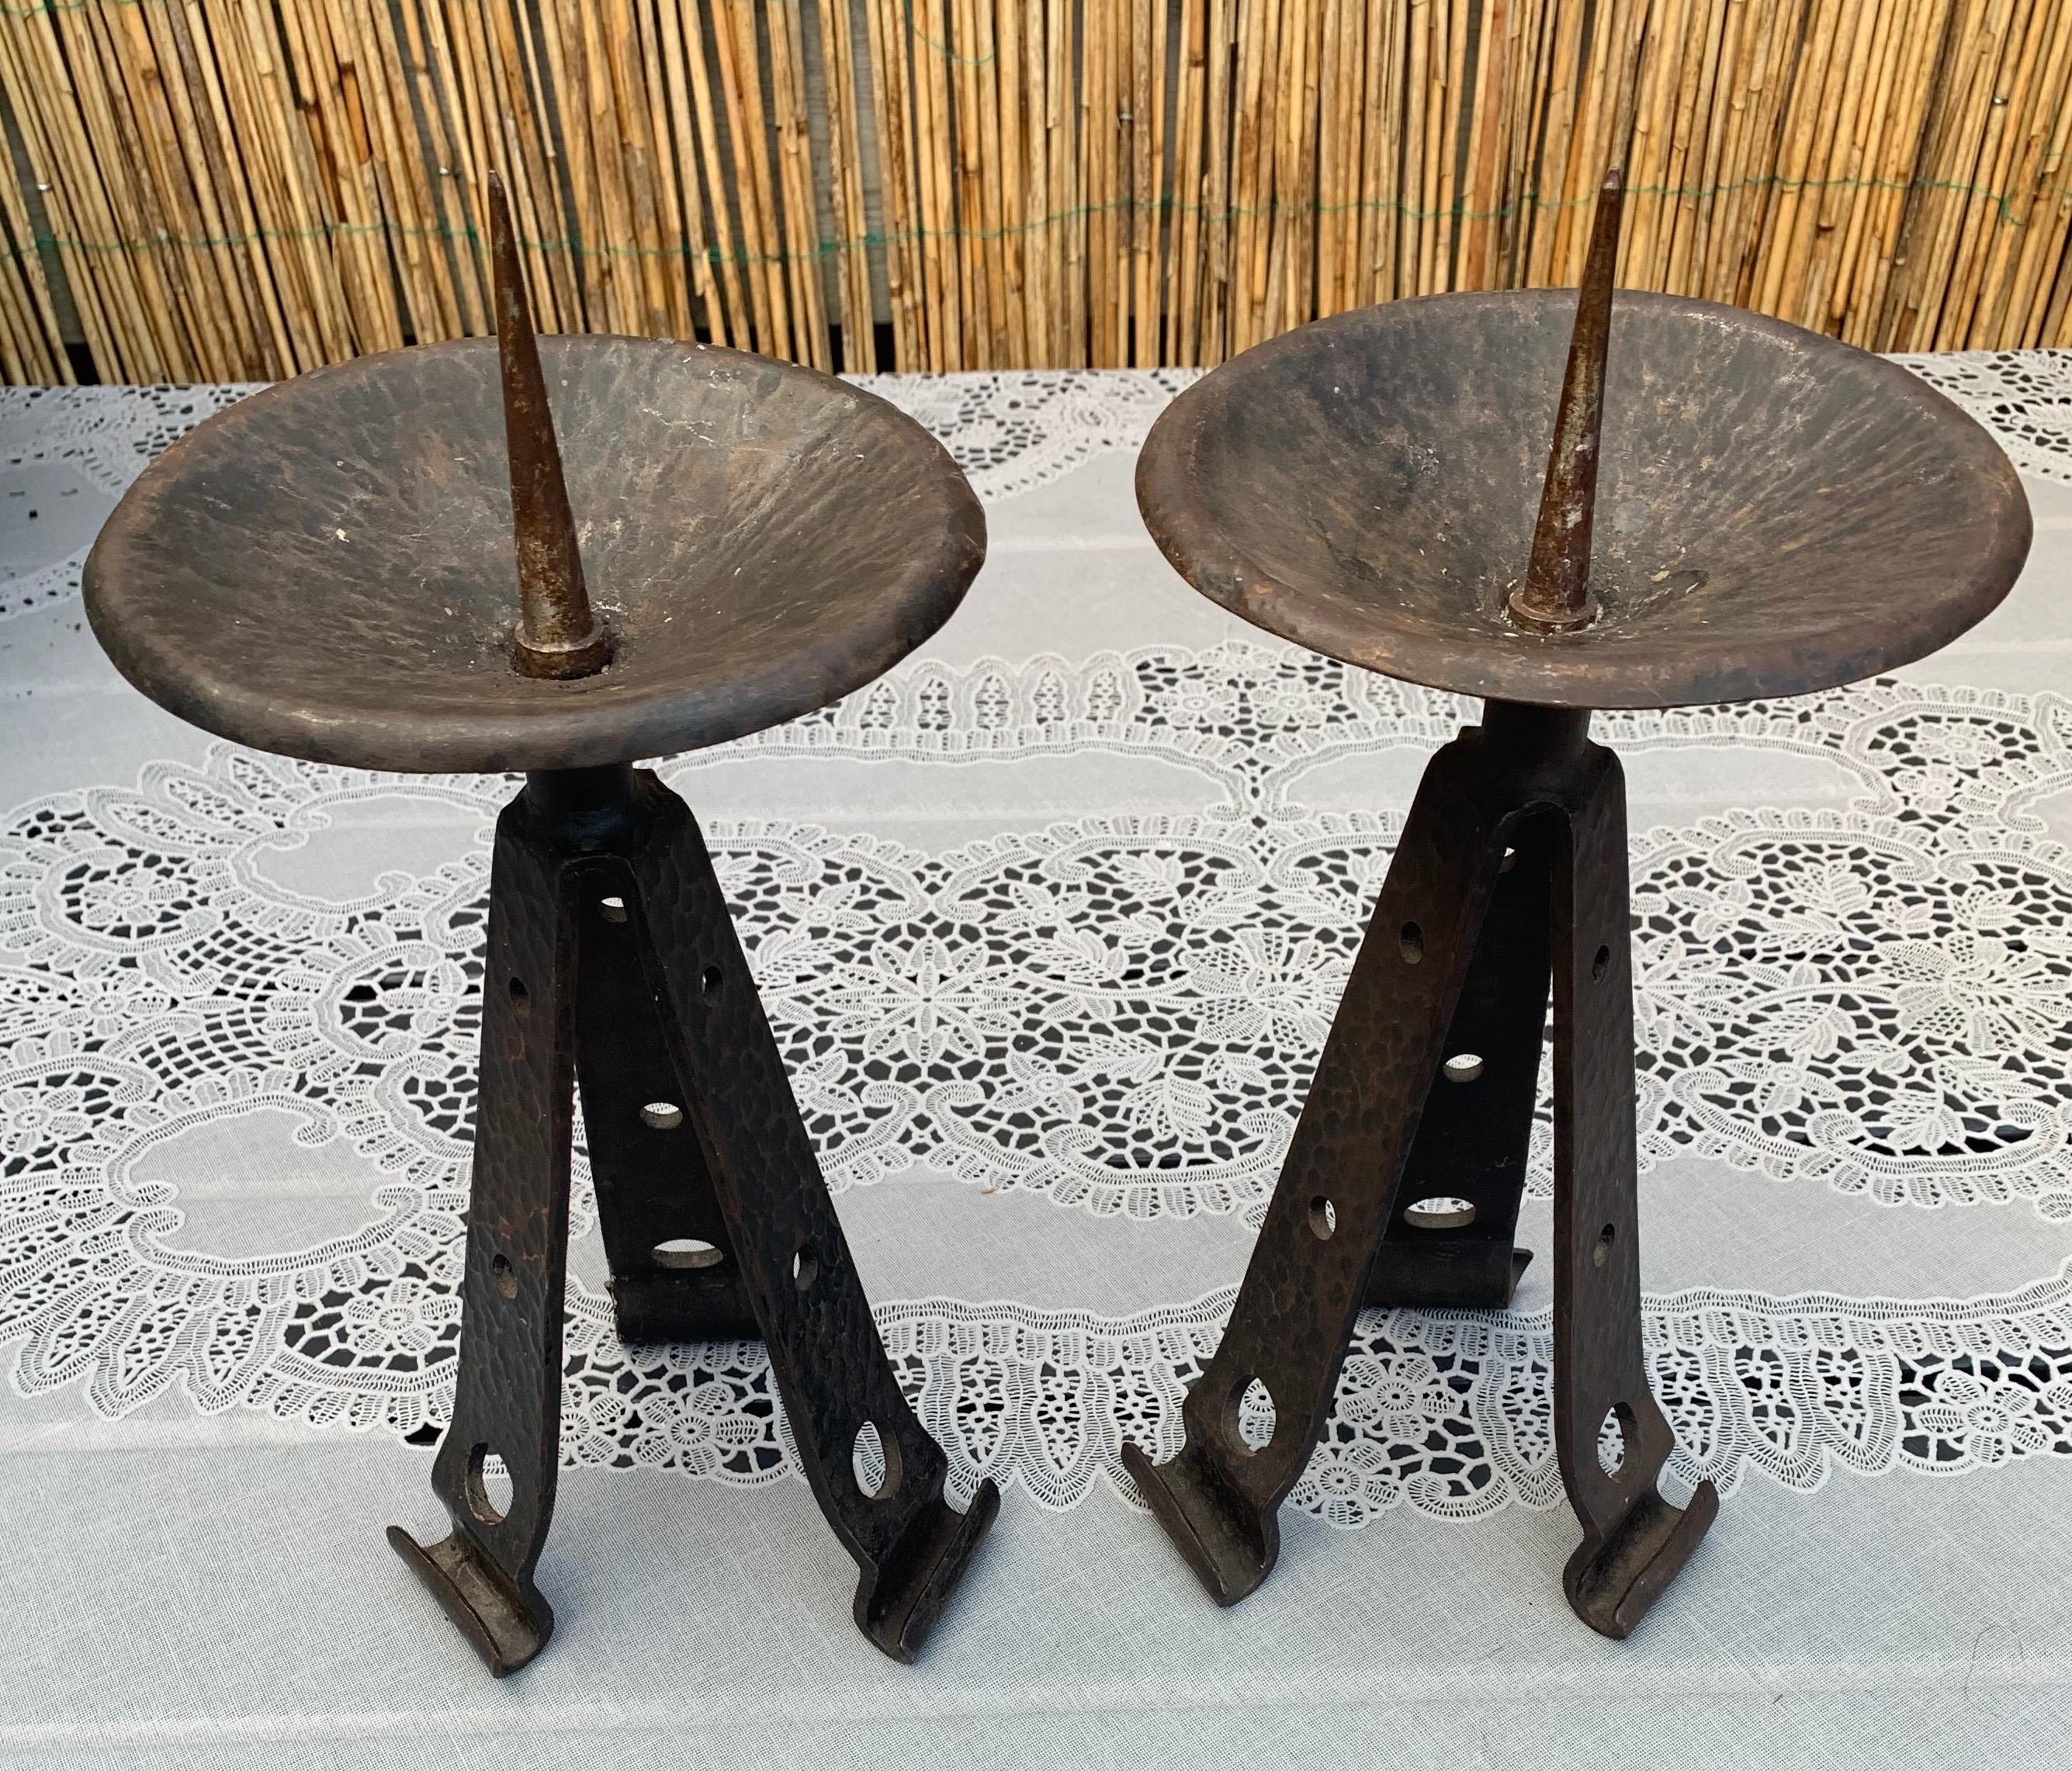 Rare & Sturdy Pair of Brutalist Forged Wrought Iron Candlesticks / Candleholders For Sale 13